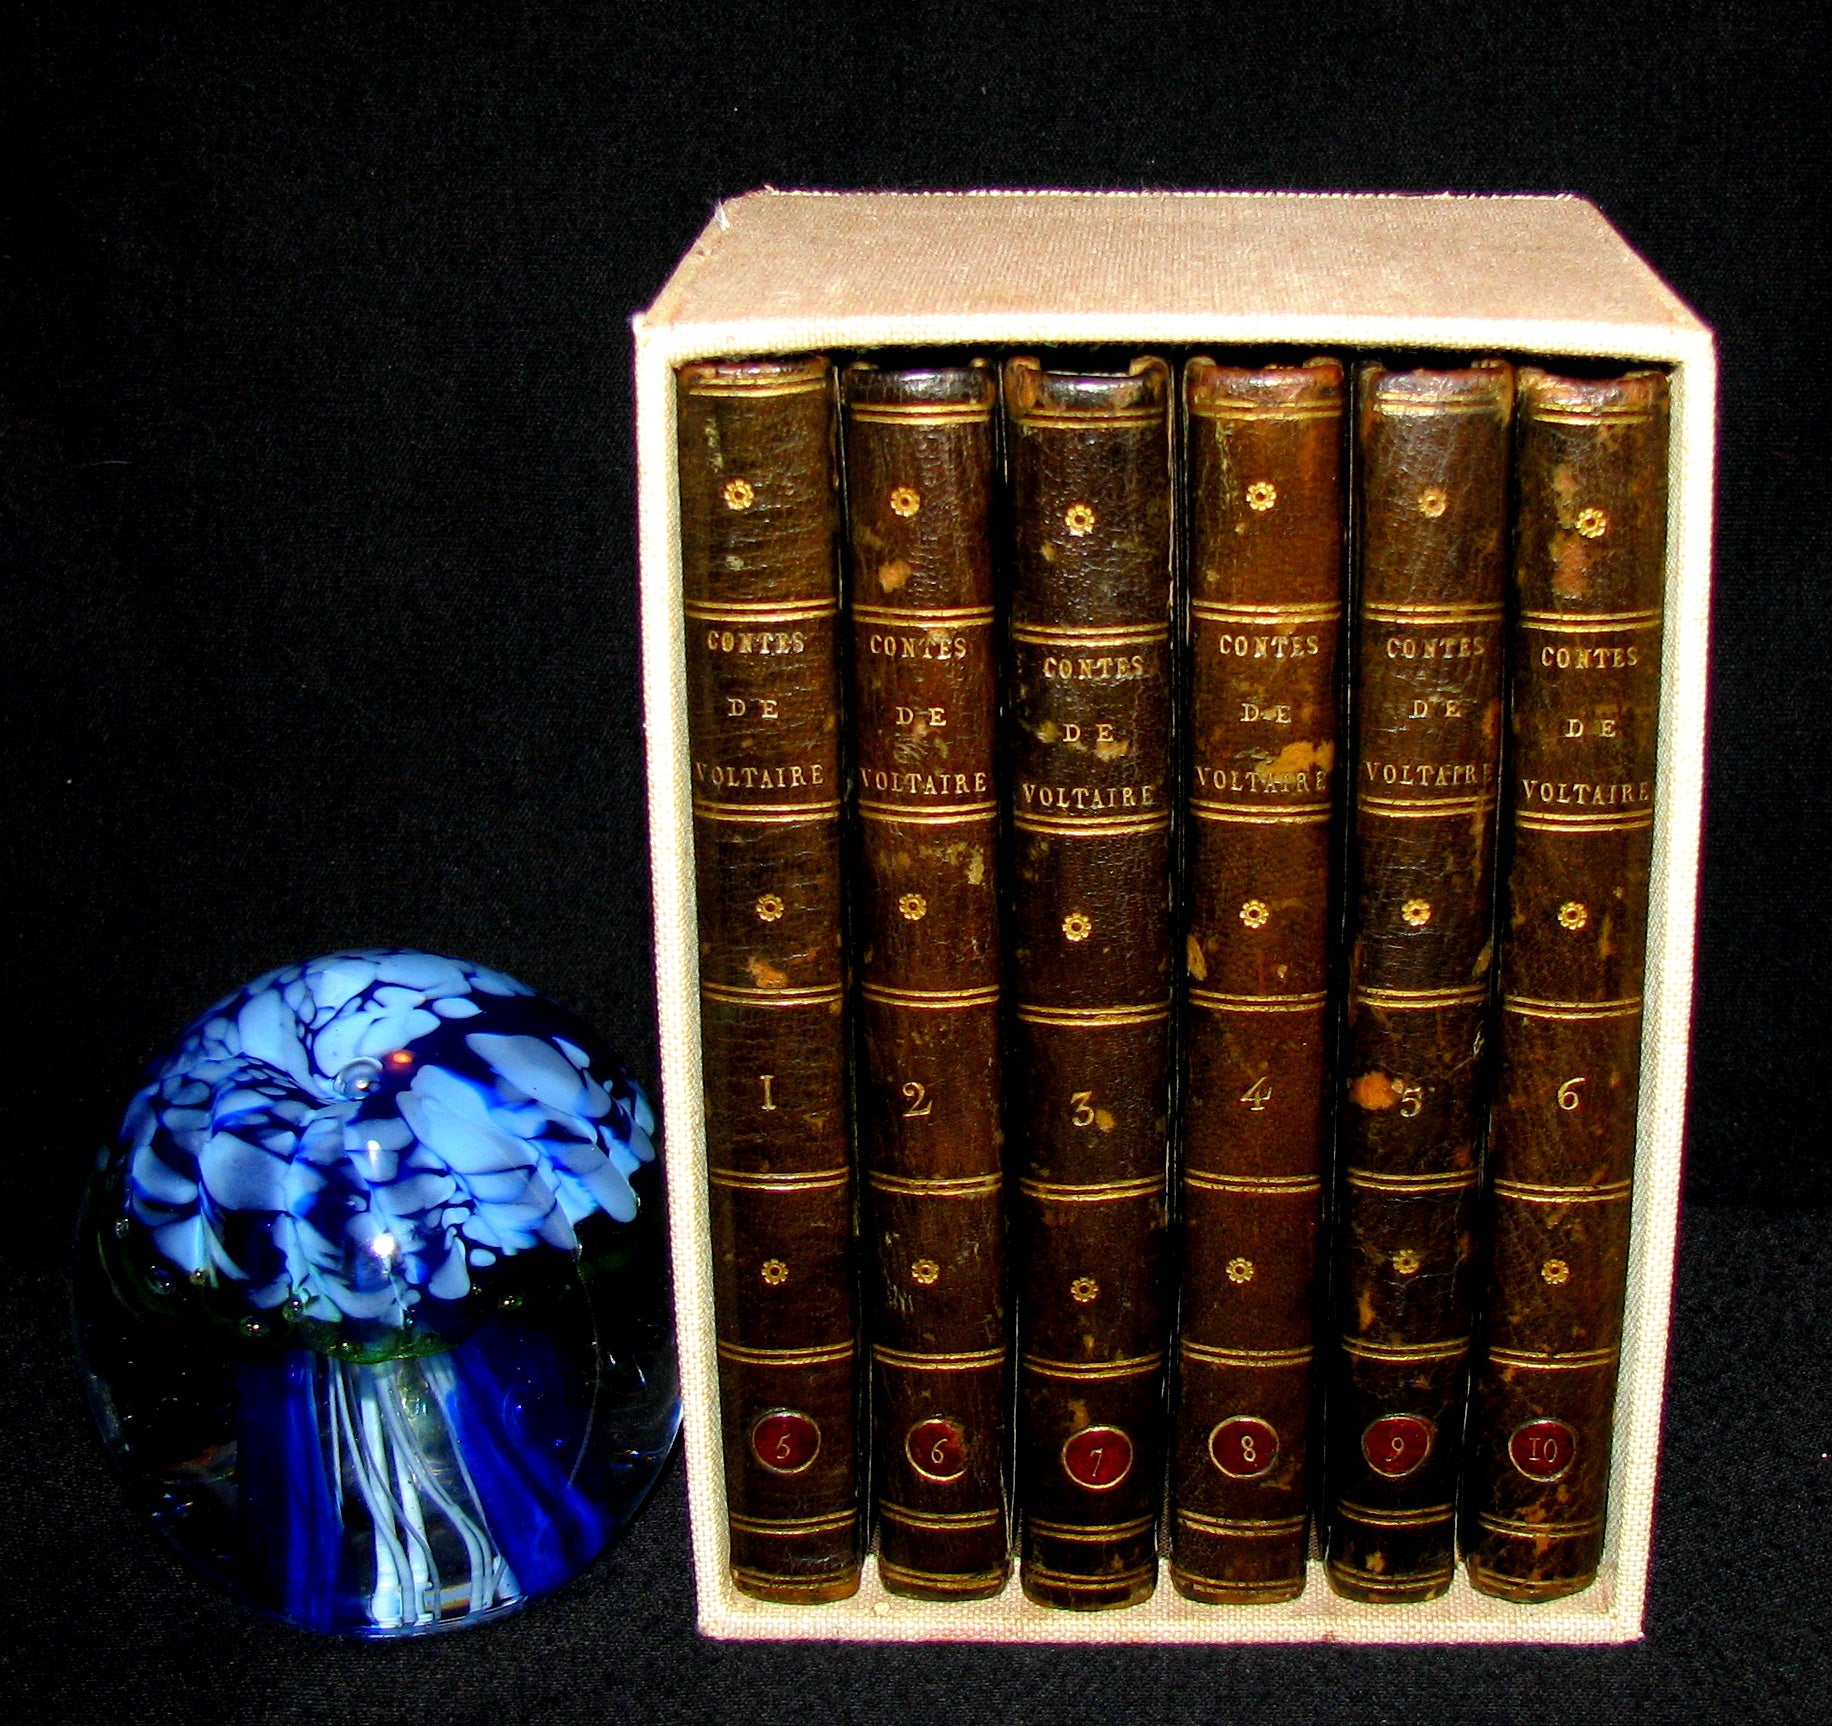 1780 Scarce French Bookset - Romans et Contes by VOLTAIRE from the Collection of comte d'Artois